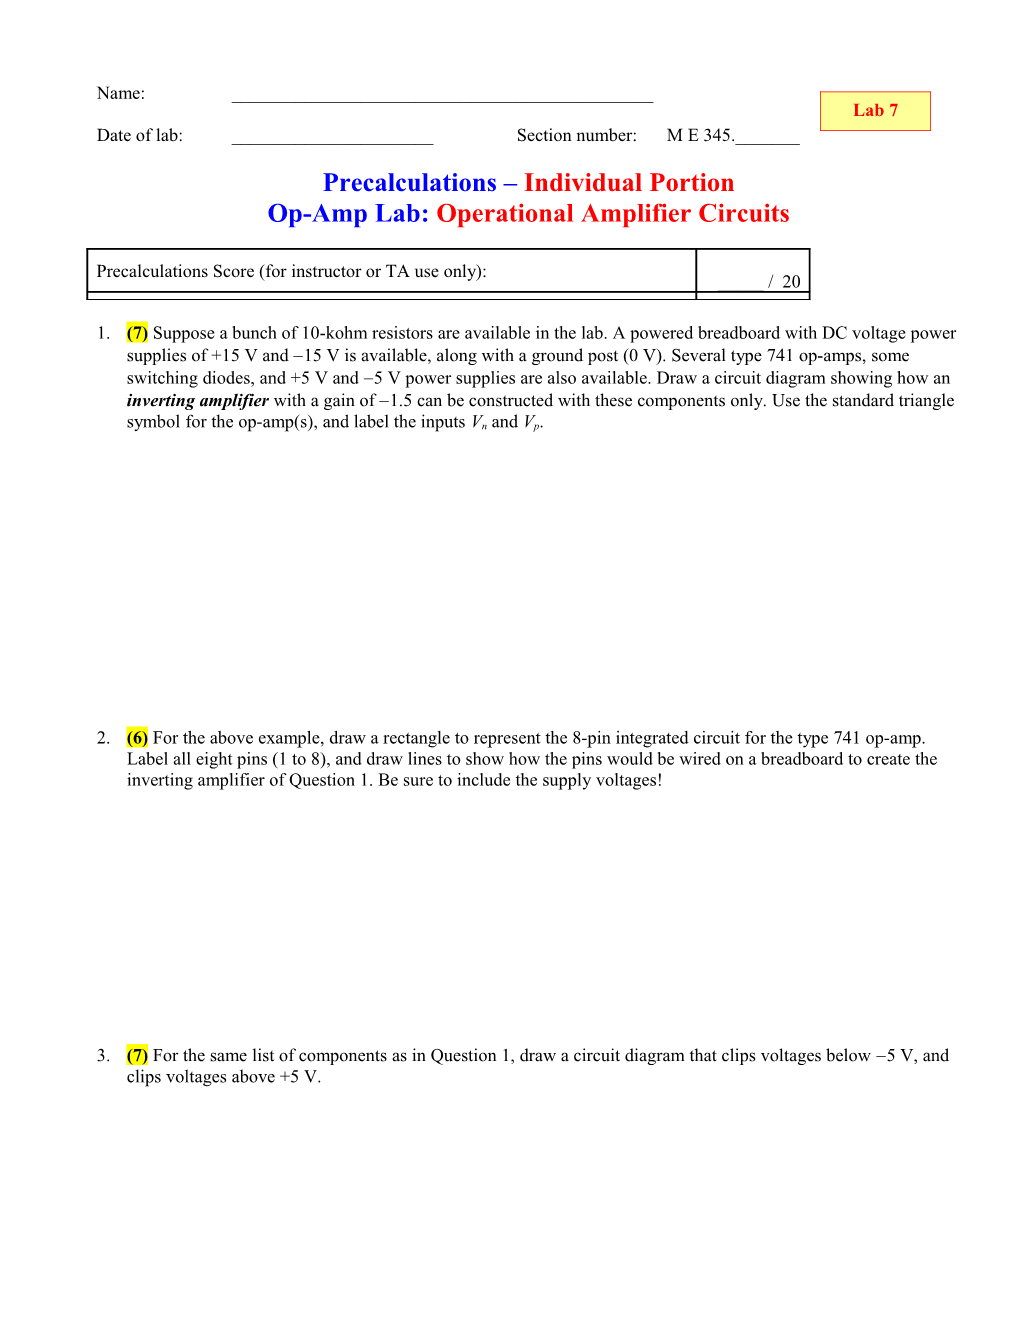 Cover Page for Precalculations Individual Portion s1